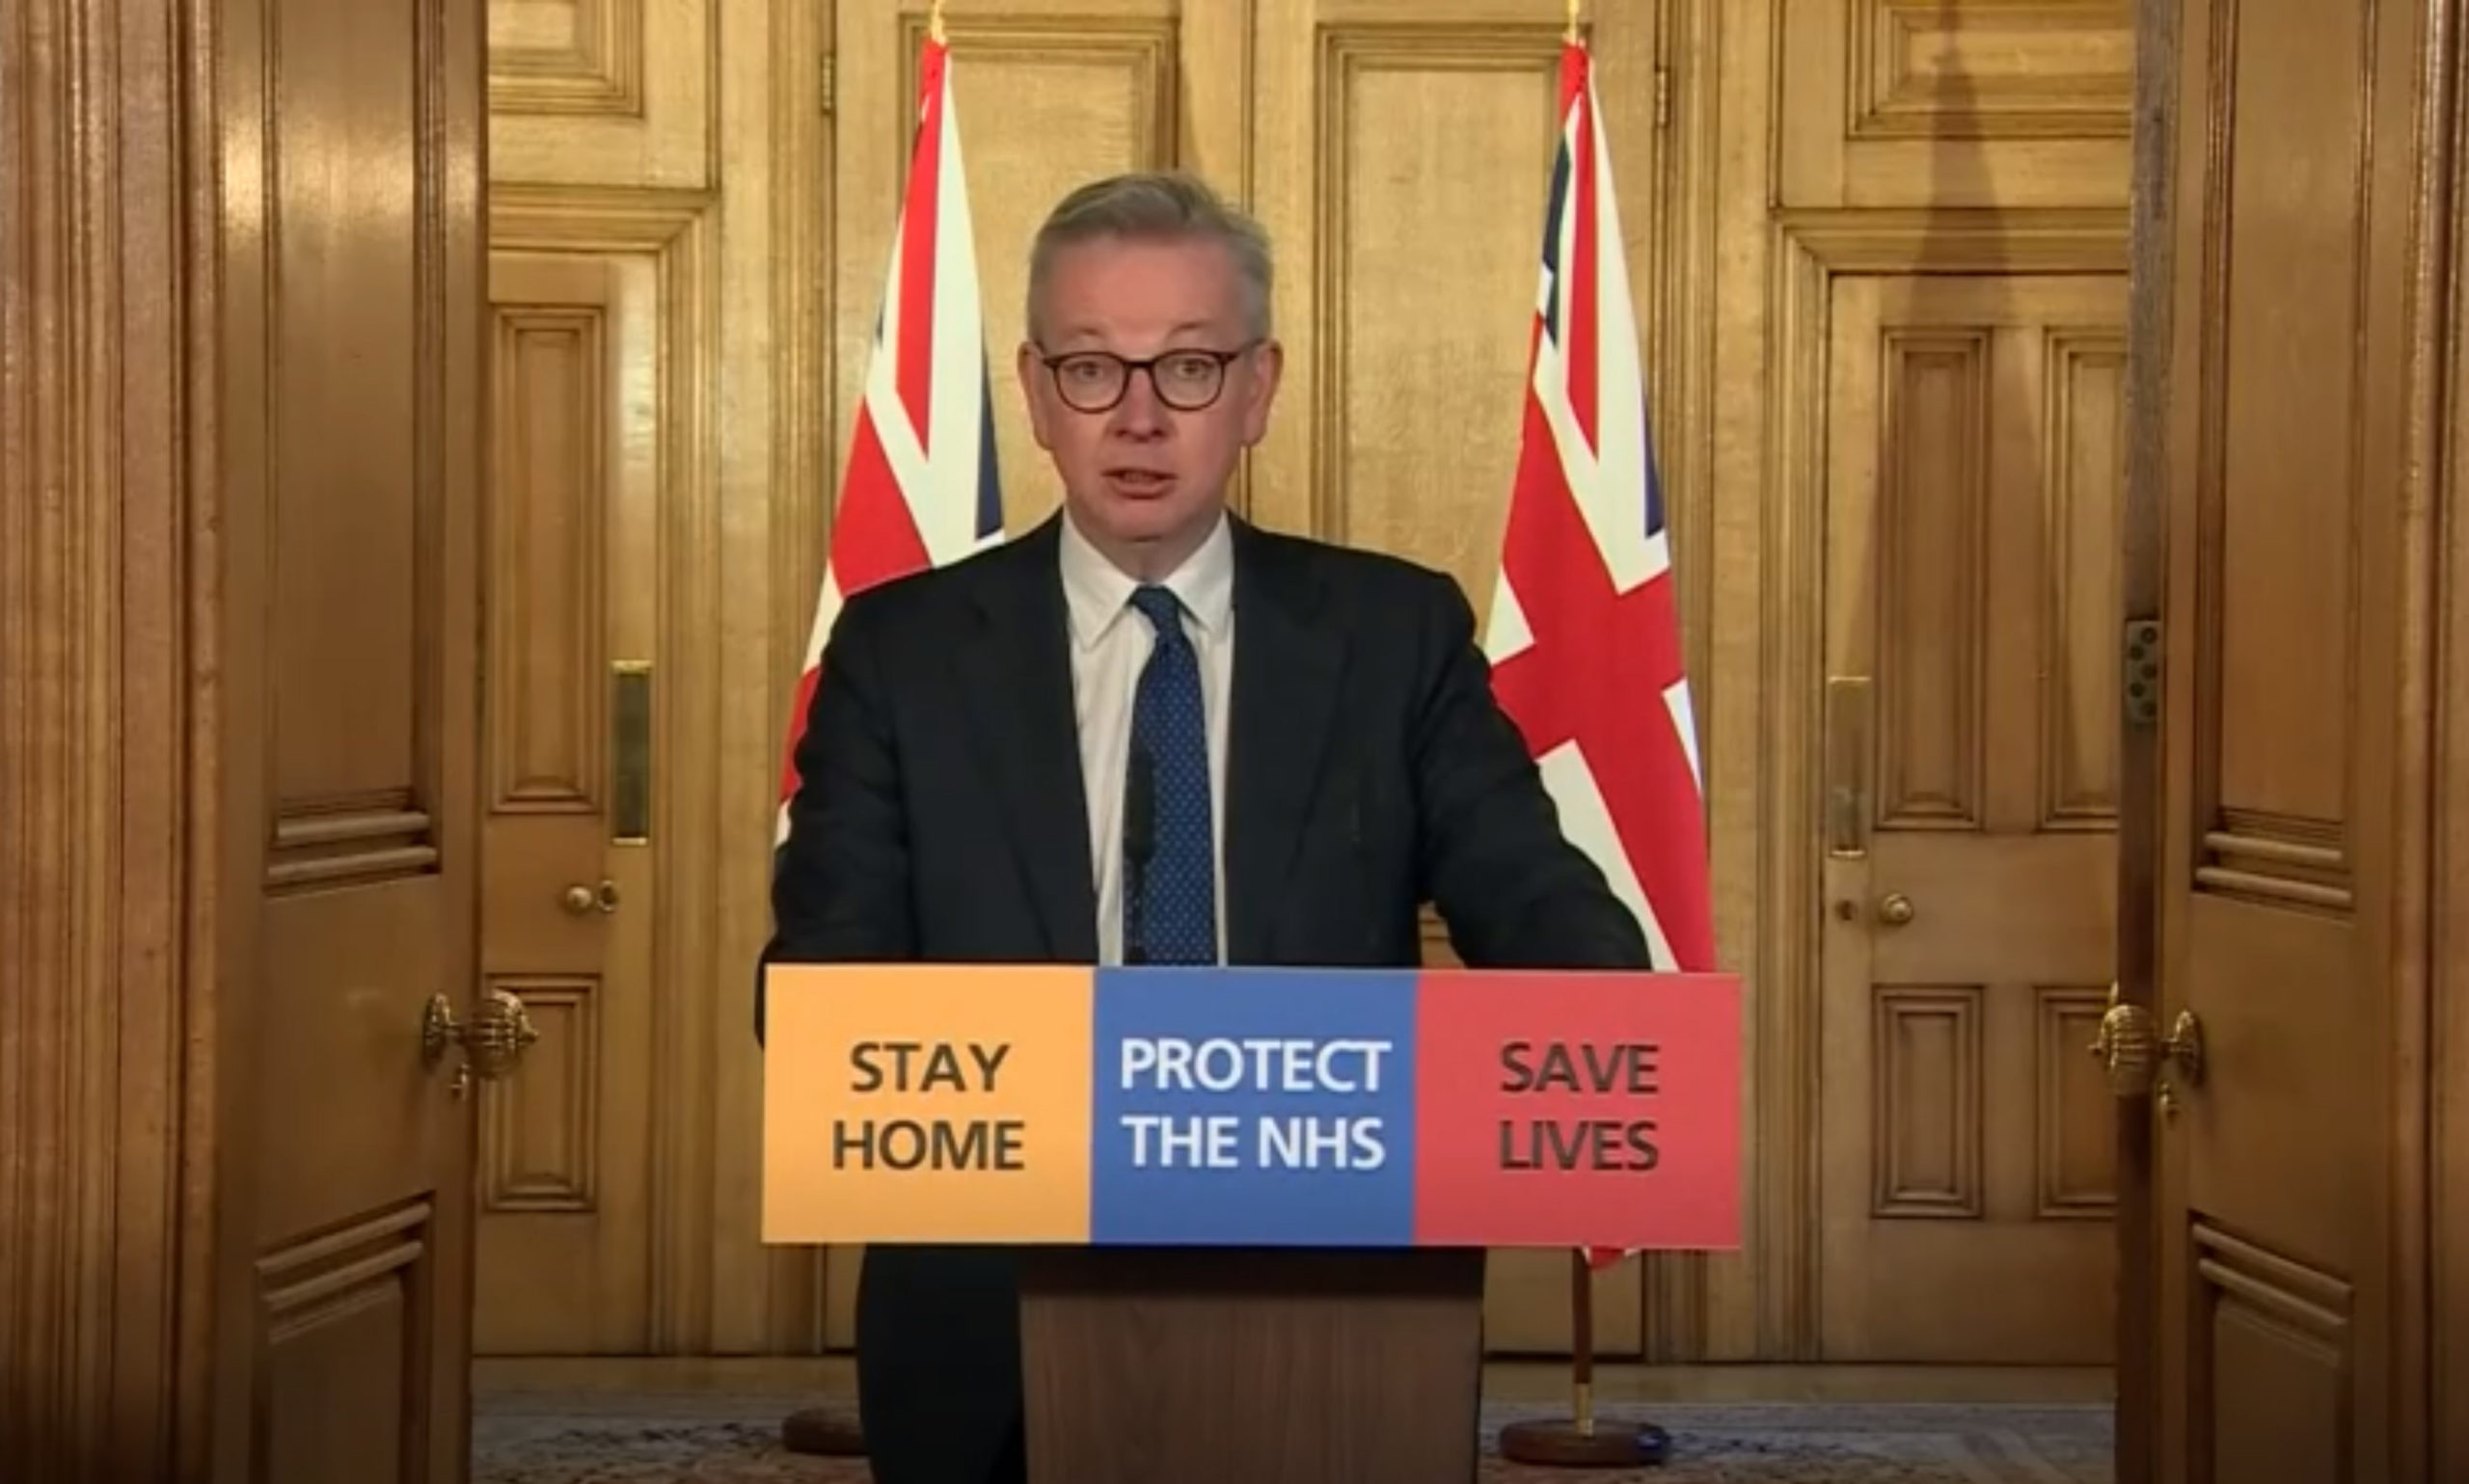 Michael Gove answering questions from the media via a video link during a media briefing in Downing Street.